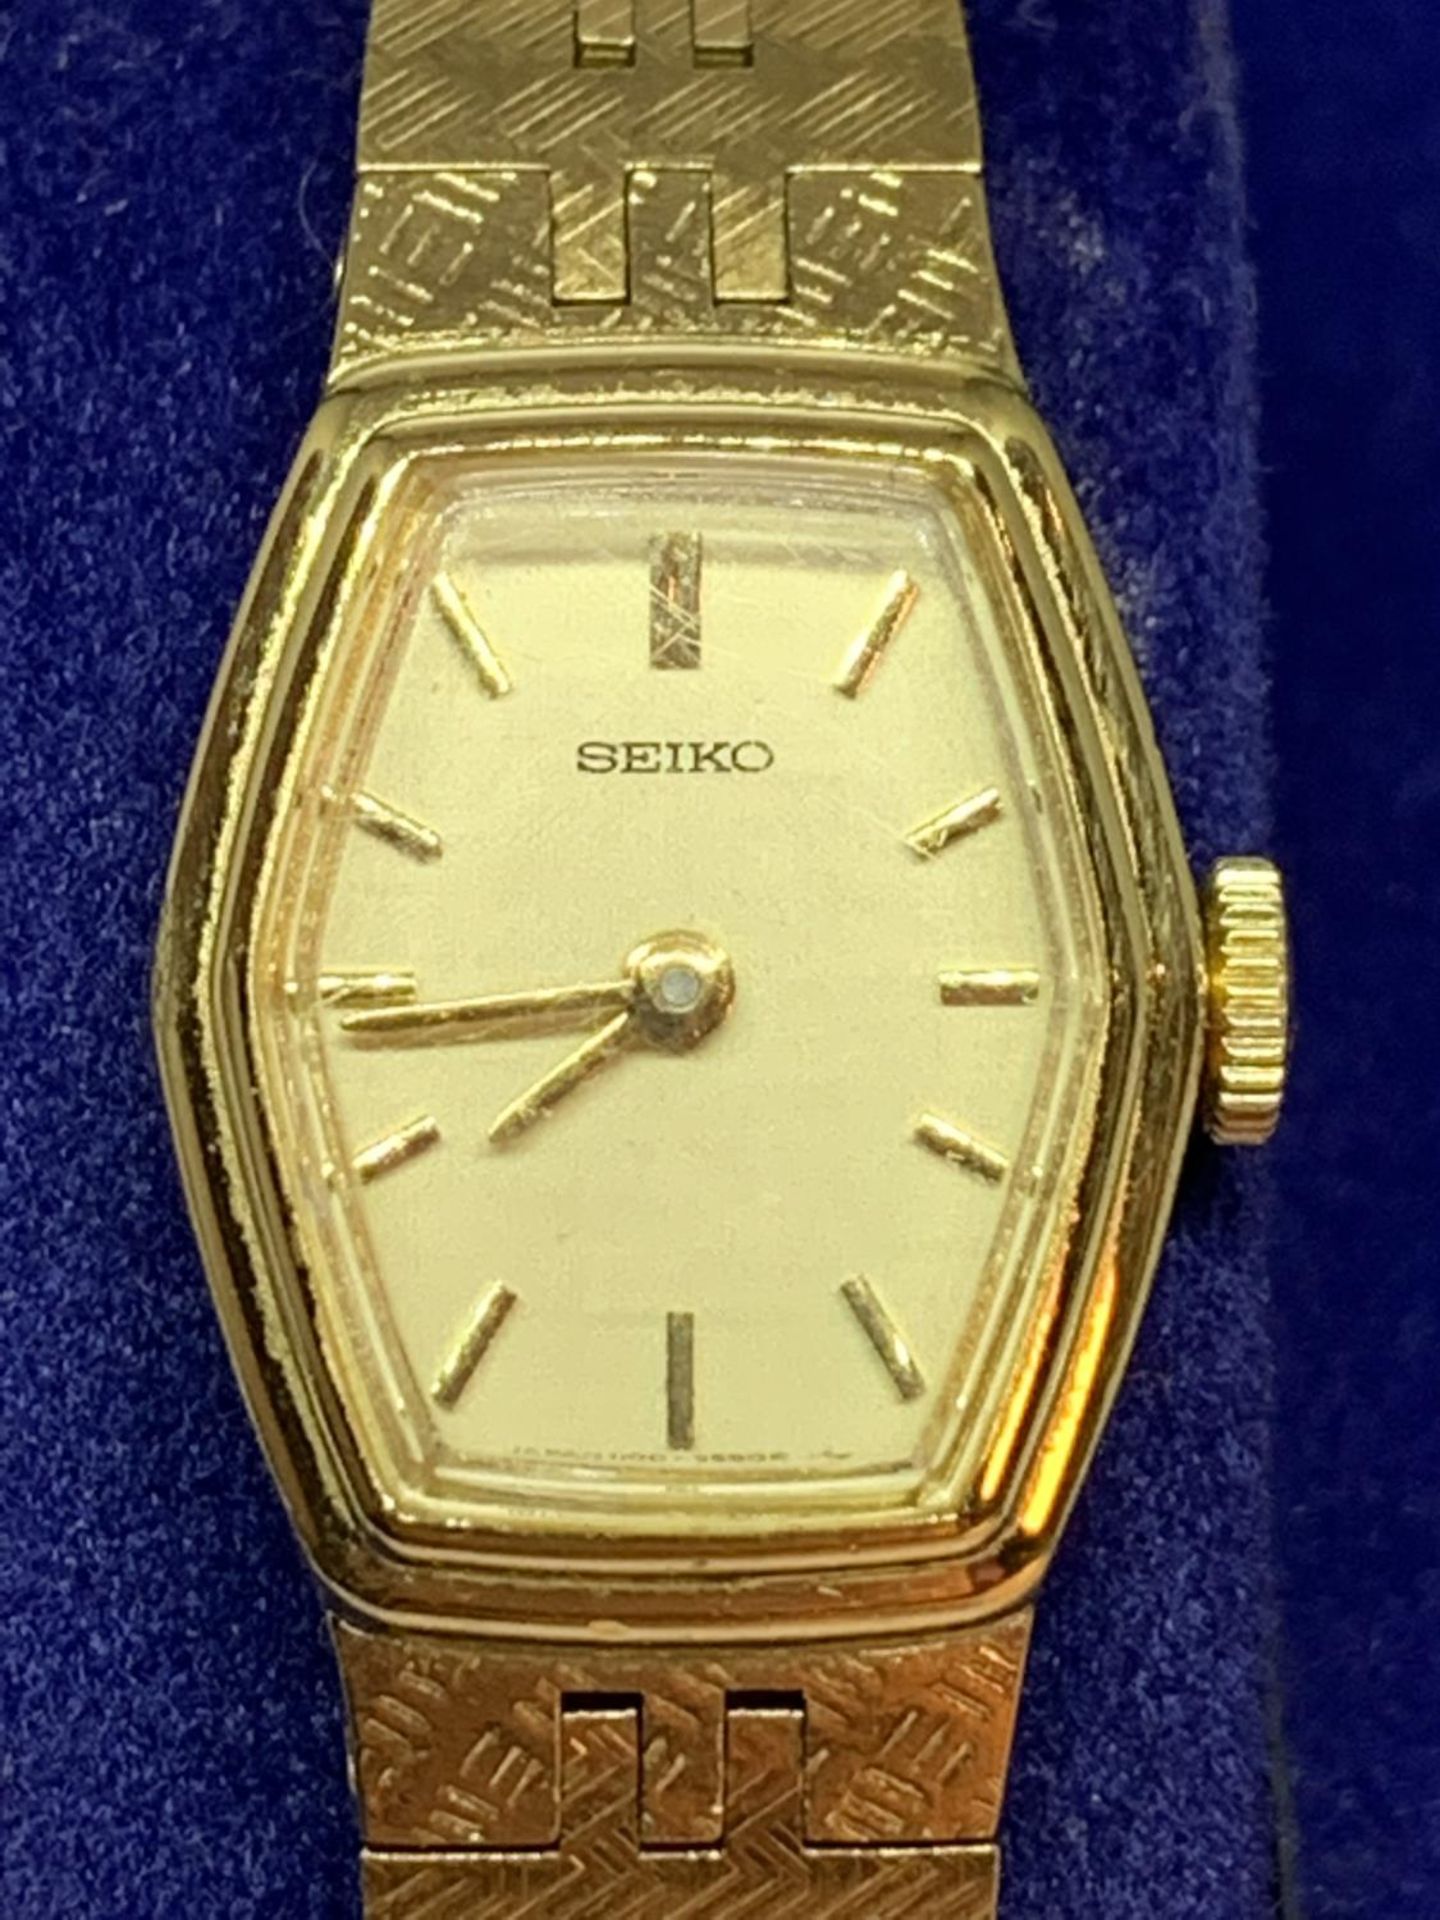 A LADIES SEIKO WRISTWATCH WITH A PRESENTATION BOX, SEEN WORKING BUT NO WARRANTY - Image 3 of 3